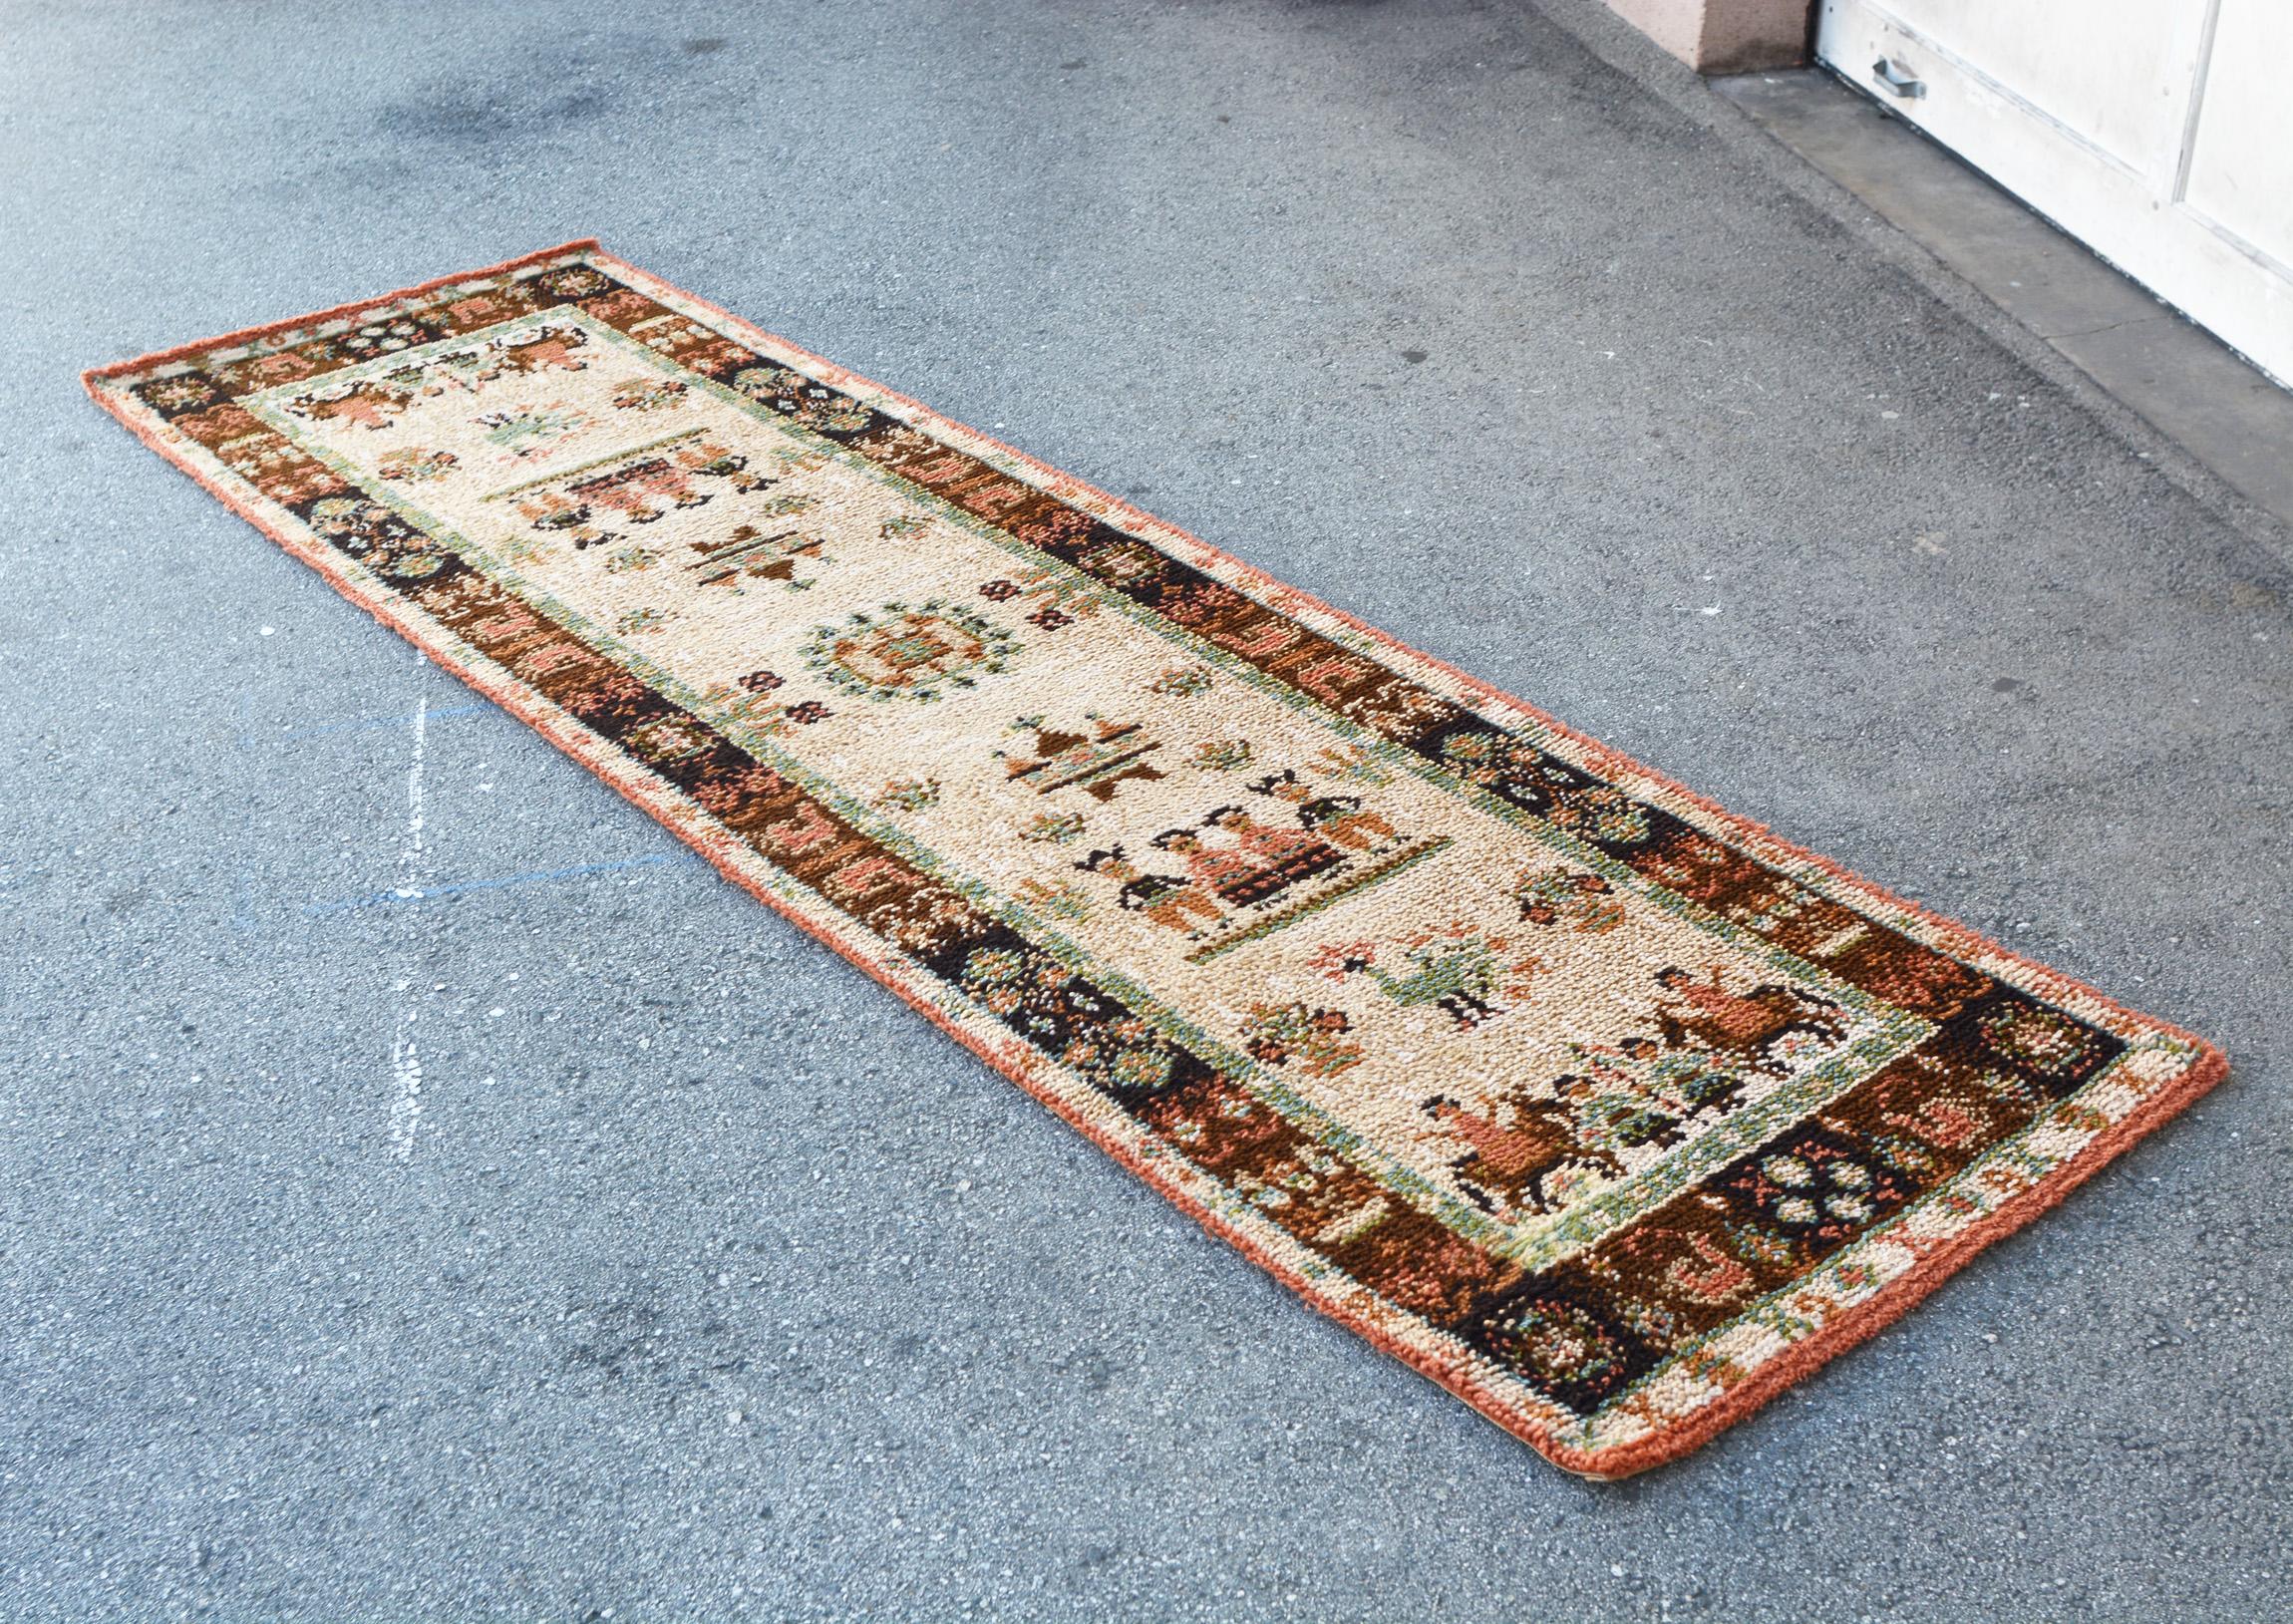 Nine foot long 100% wool runner by Ege Axminster. This is part of the Ege Country series and titled Mountain Life. This whimsical rug depicts elements of traditional life in Denmark's mountains. The pile is a half inch thick. There are no stains or